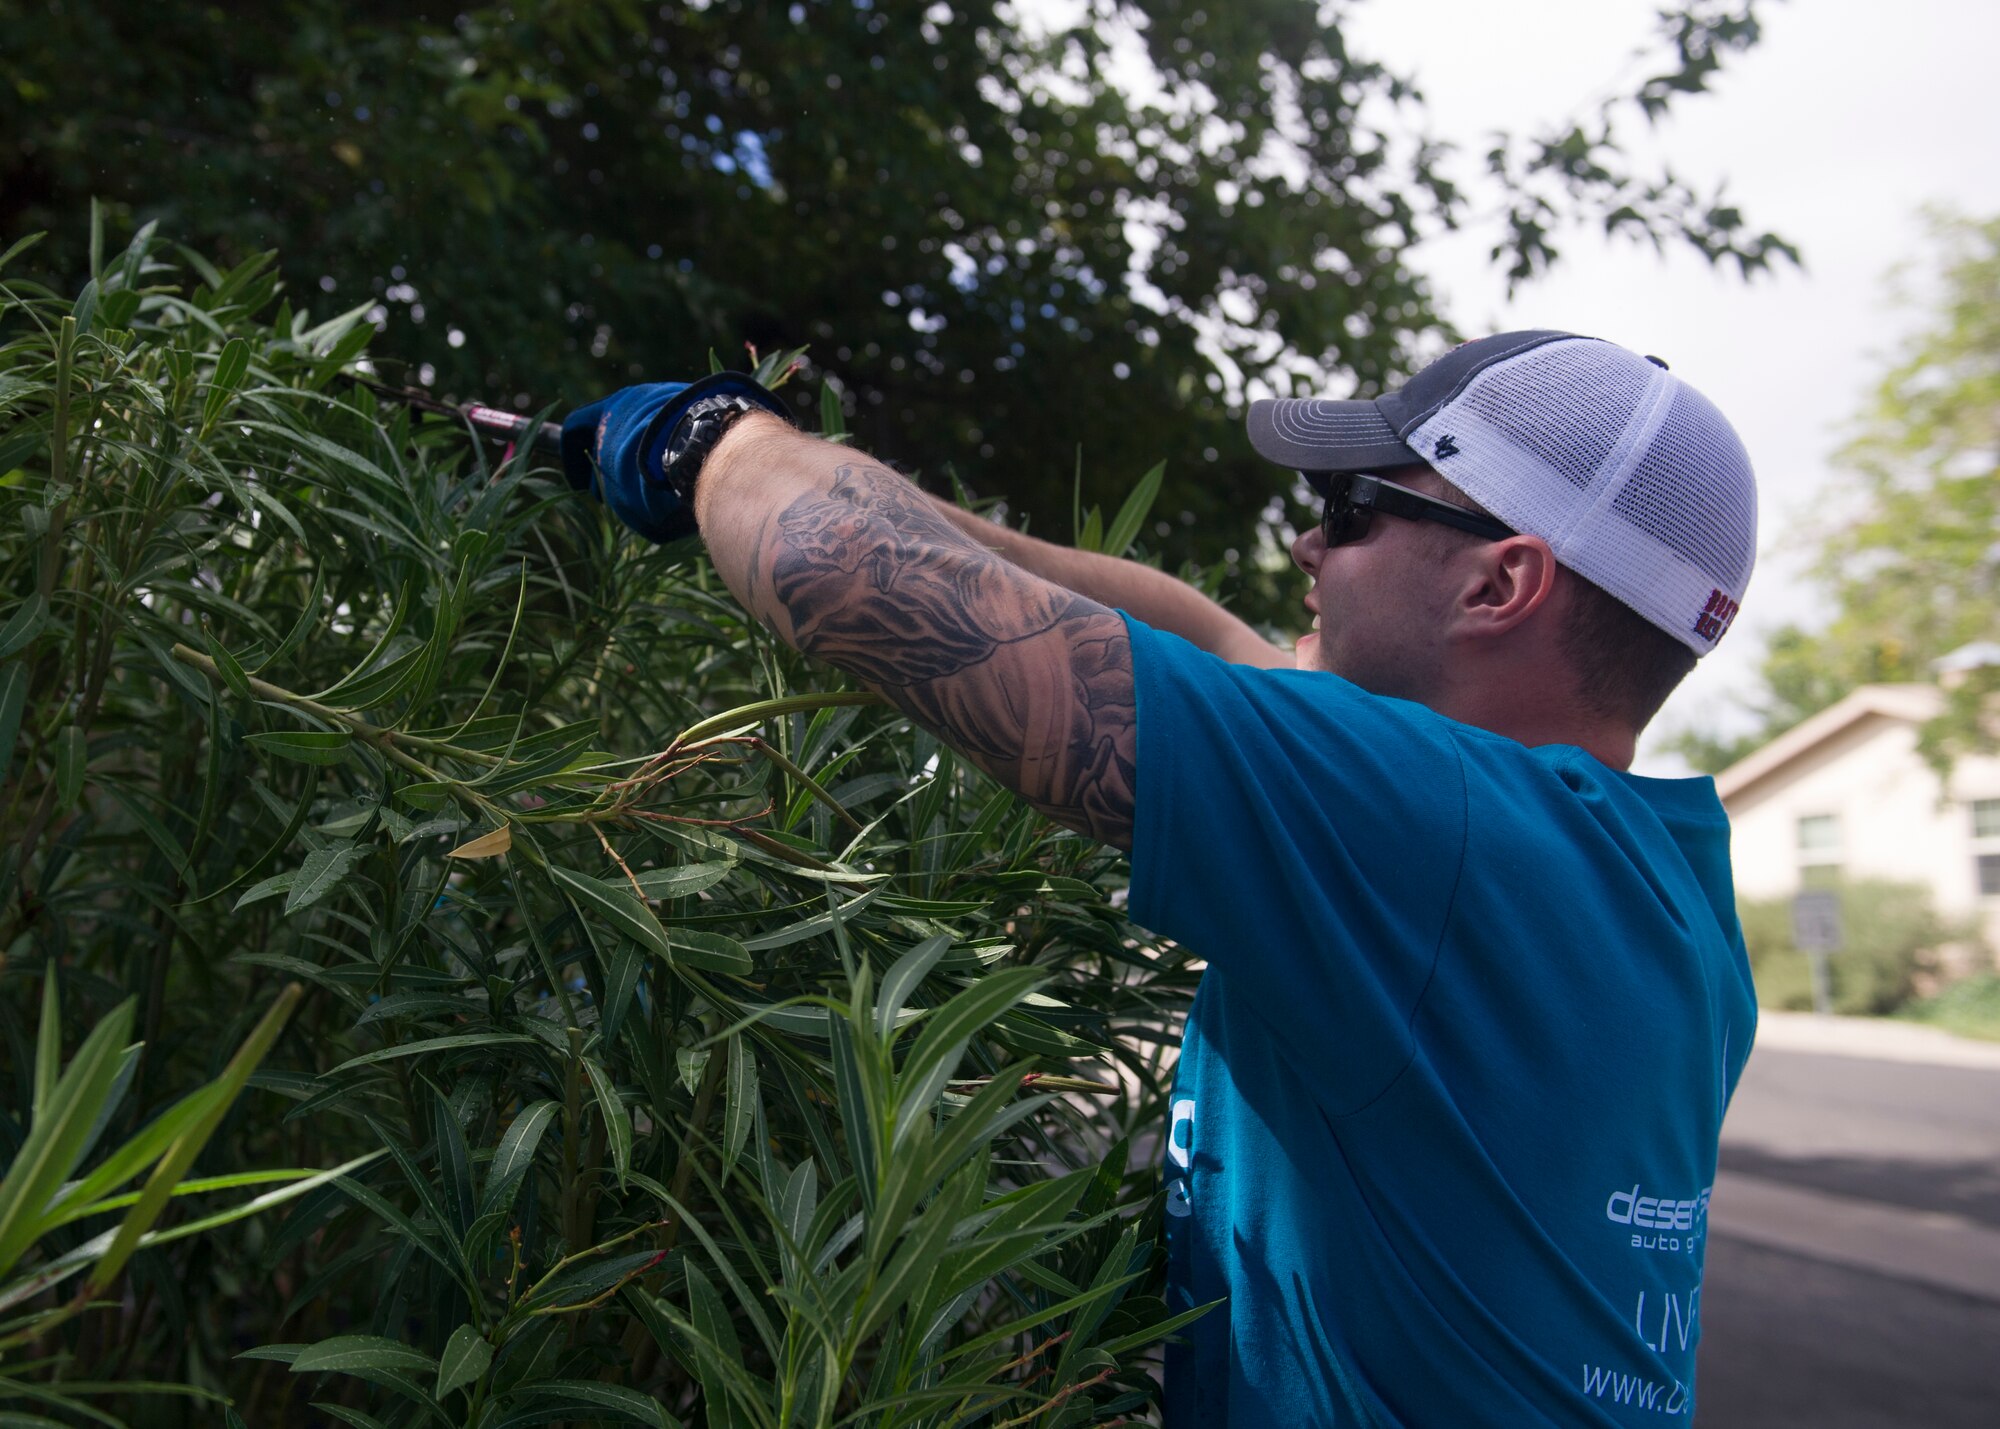 Senior Airman Taylor Vondrasek, 49th Materiel Maintenance Support Squadron structural journeyman, cuts down hedges at a local home during The Otero County Day of Caring in Alamagordo N.M., Sept. 5. The Day of Caring is an event sponsored by the United Way of Otero County. Volunteers from Holloman and the local community perform various tasks for individuals who are unable to accomplish the tasks or cannot afford to have the work done. Such tasks include fixing their homes, yards or other facilities, while also creating a strong relationship between Team Holloman and the surrounding communities. (U.S. Air Force photo by Senior Airman Leah Ferrante/Released)